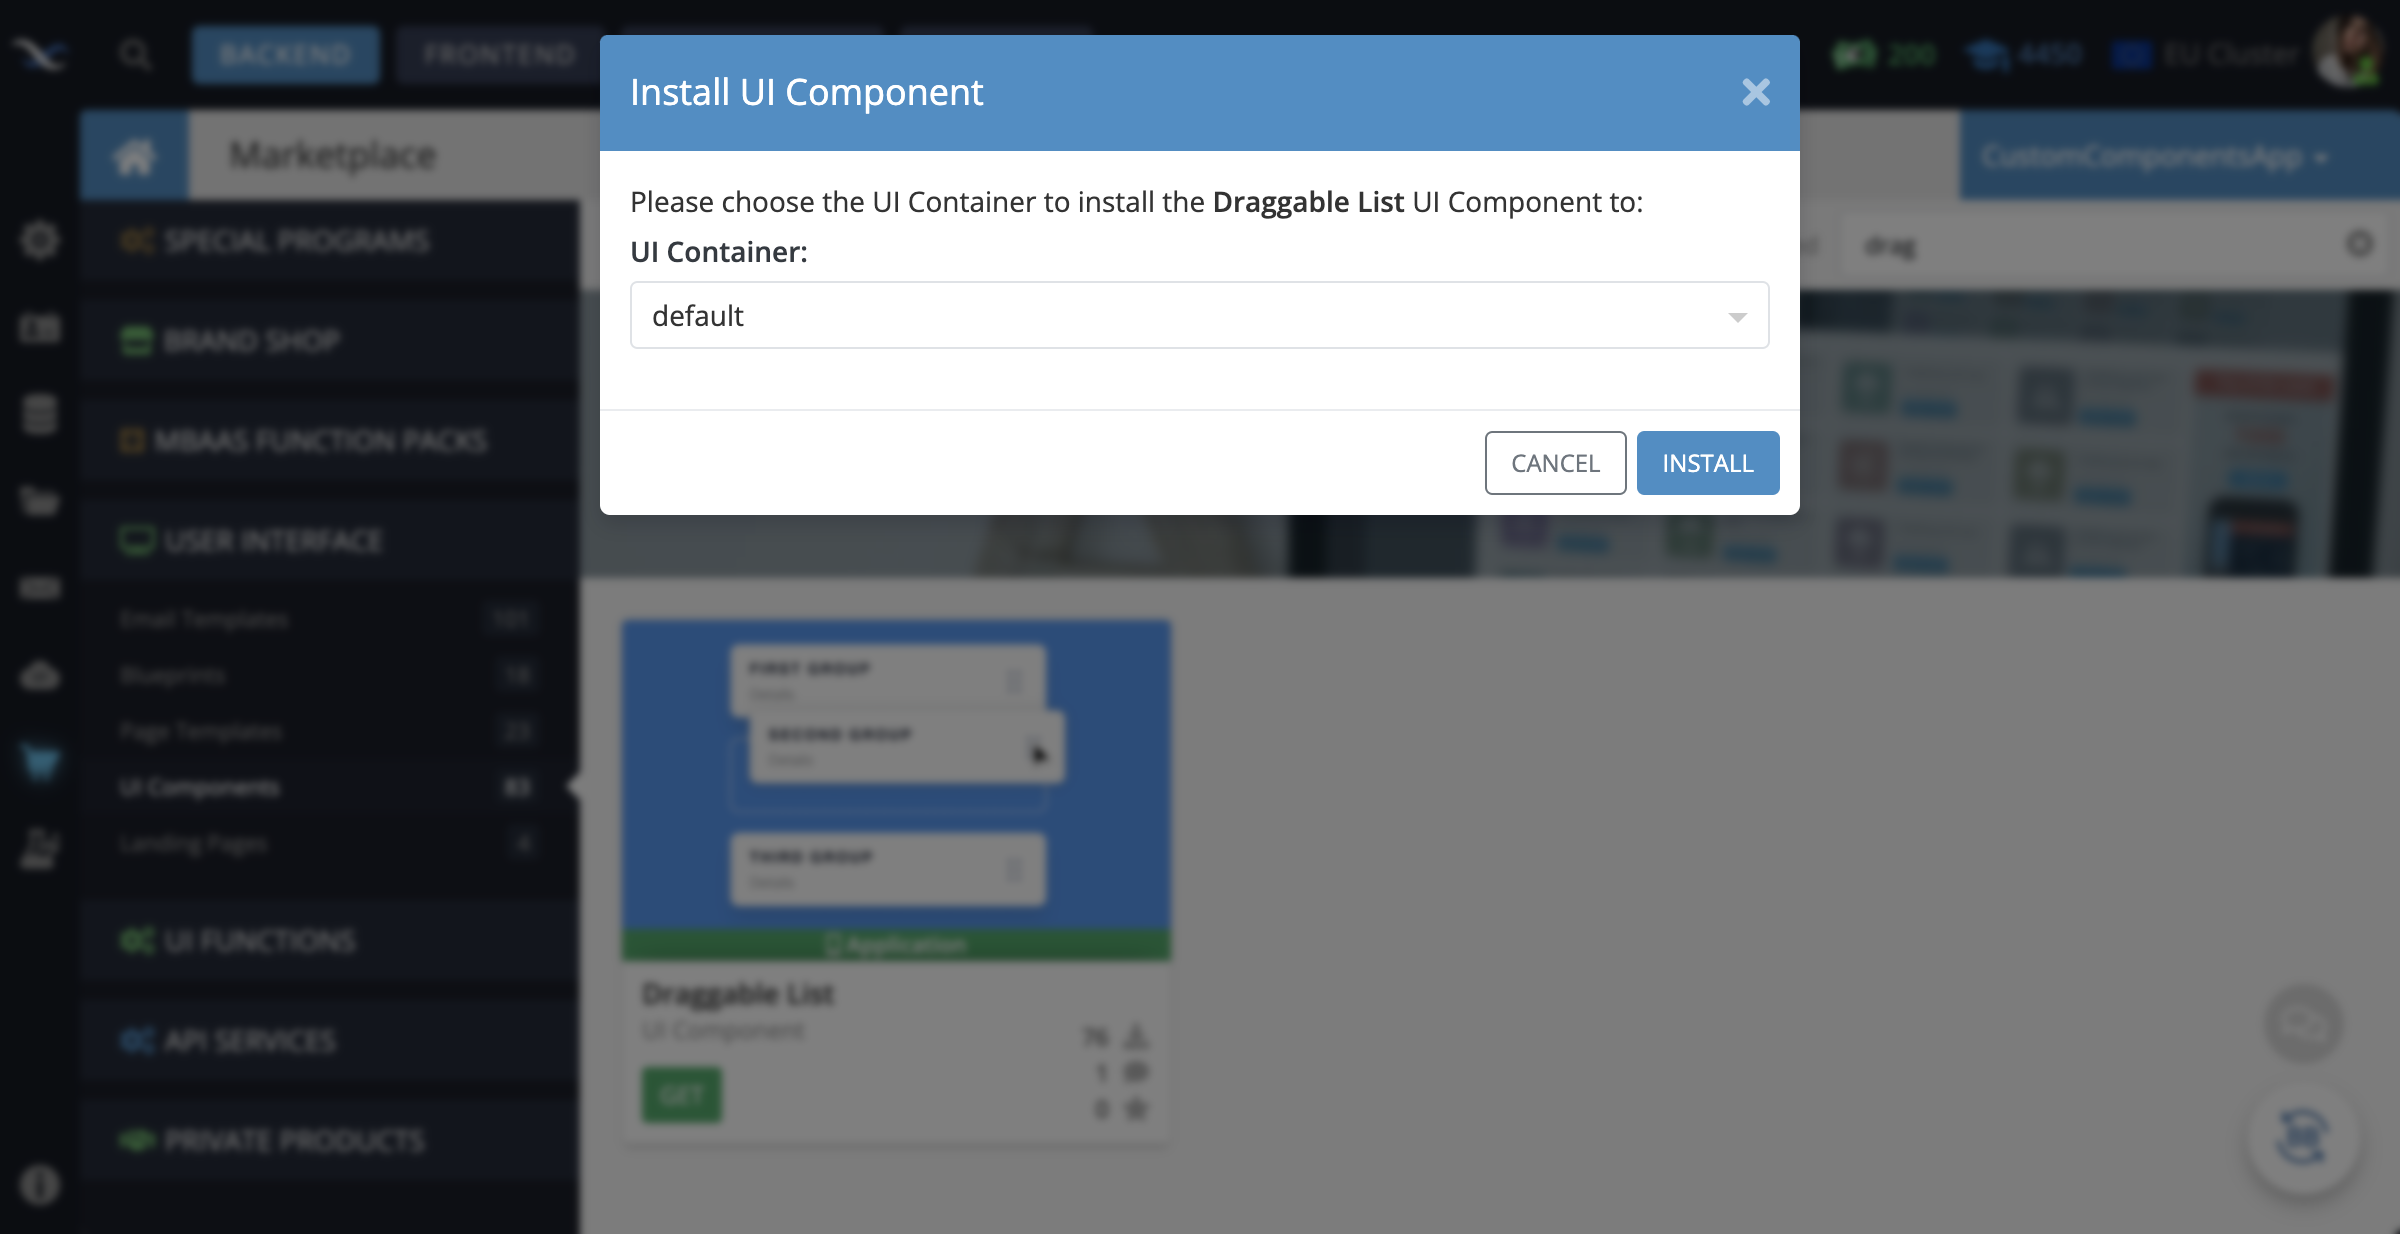 Install the component to the UI Container of your choice